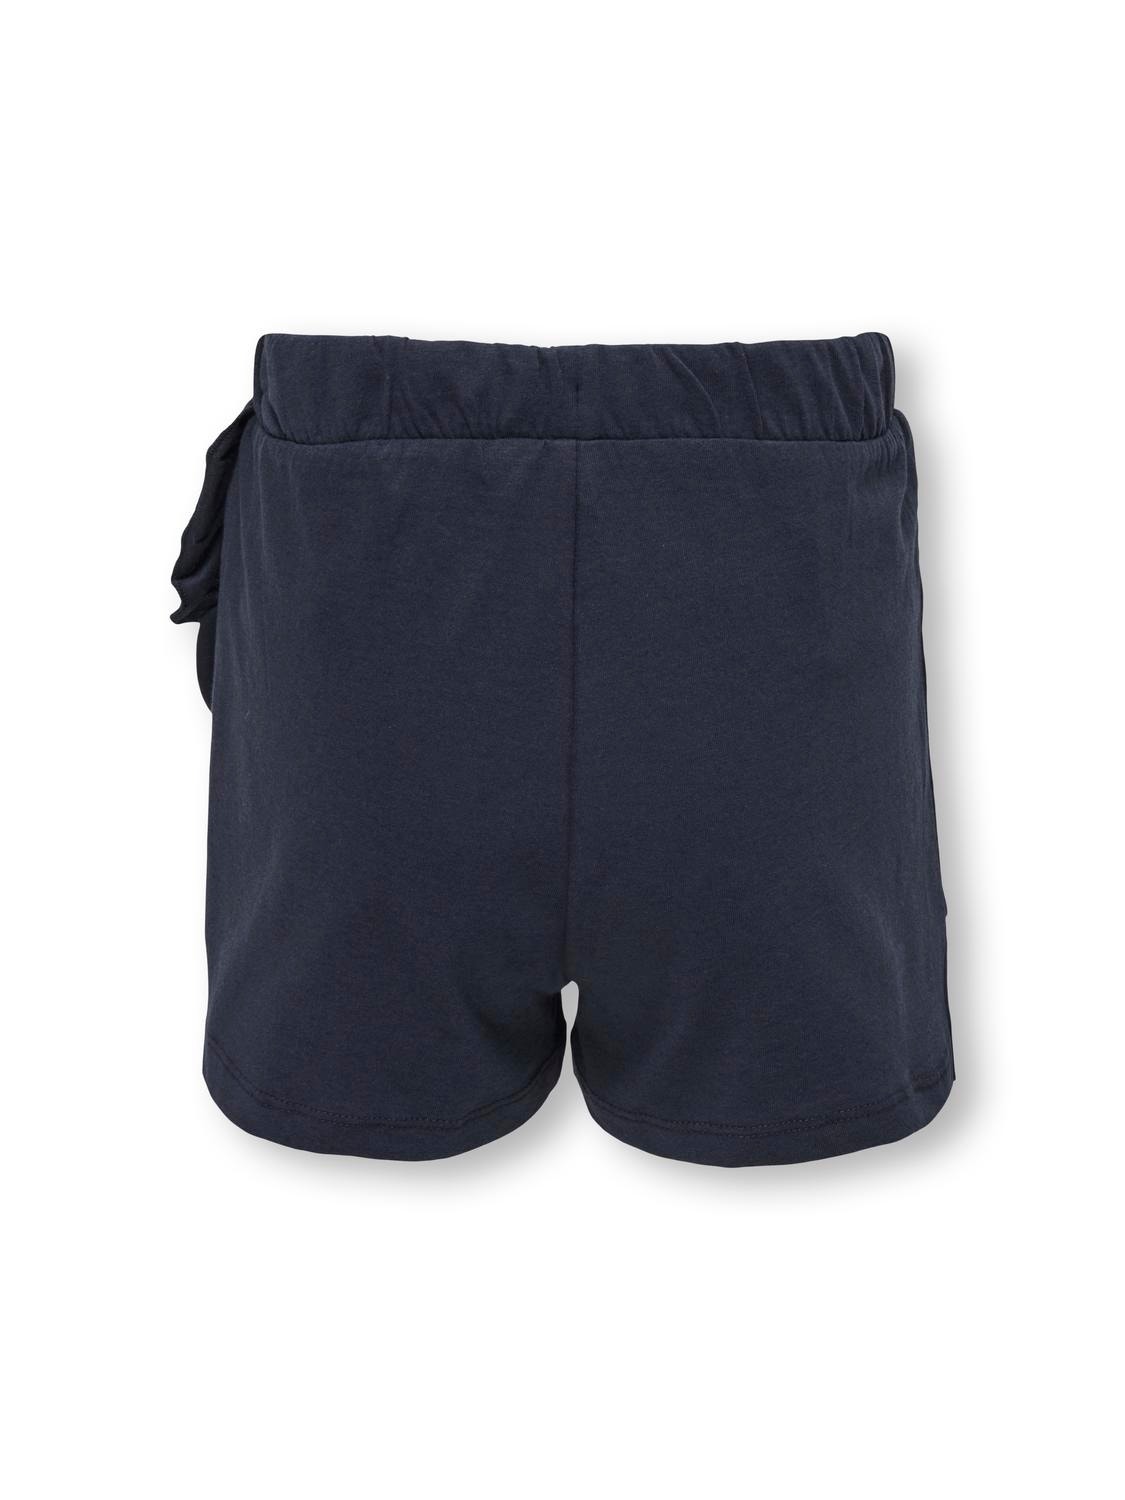 ONLY Normal passform Shorts -Night Sky - 15295263